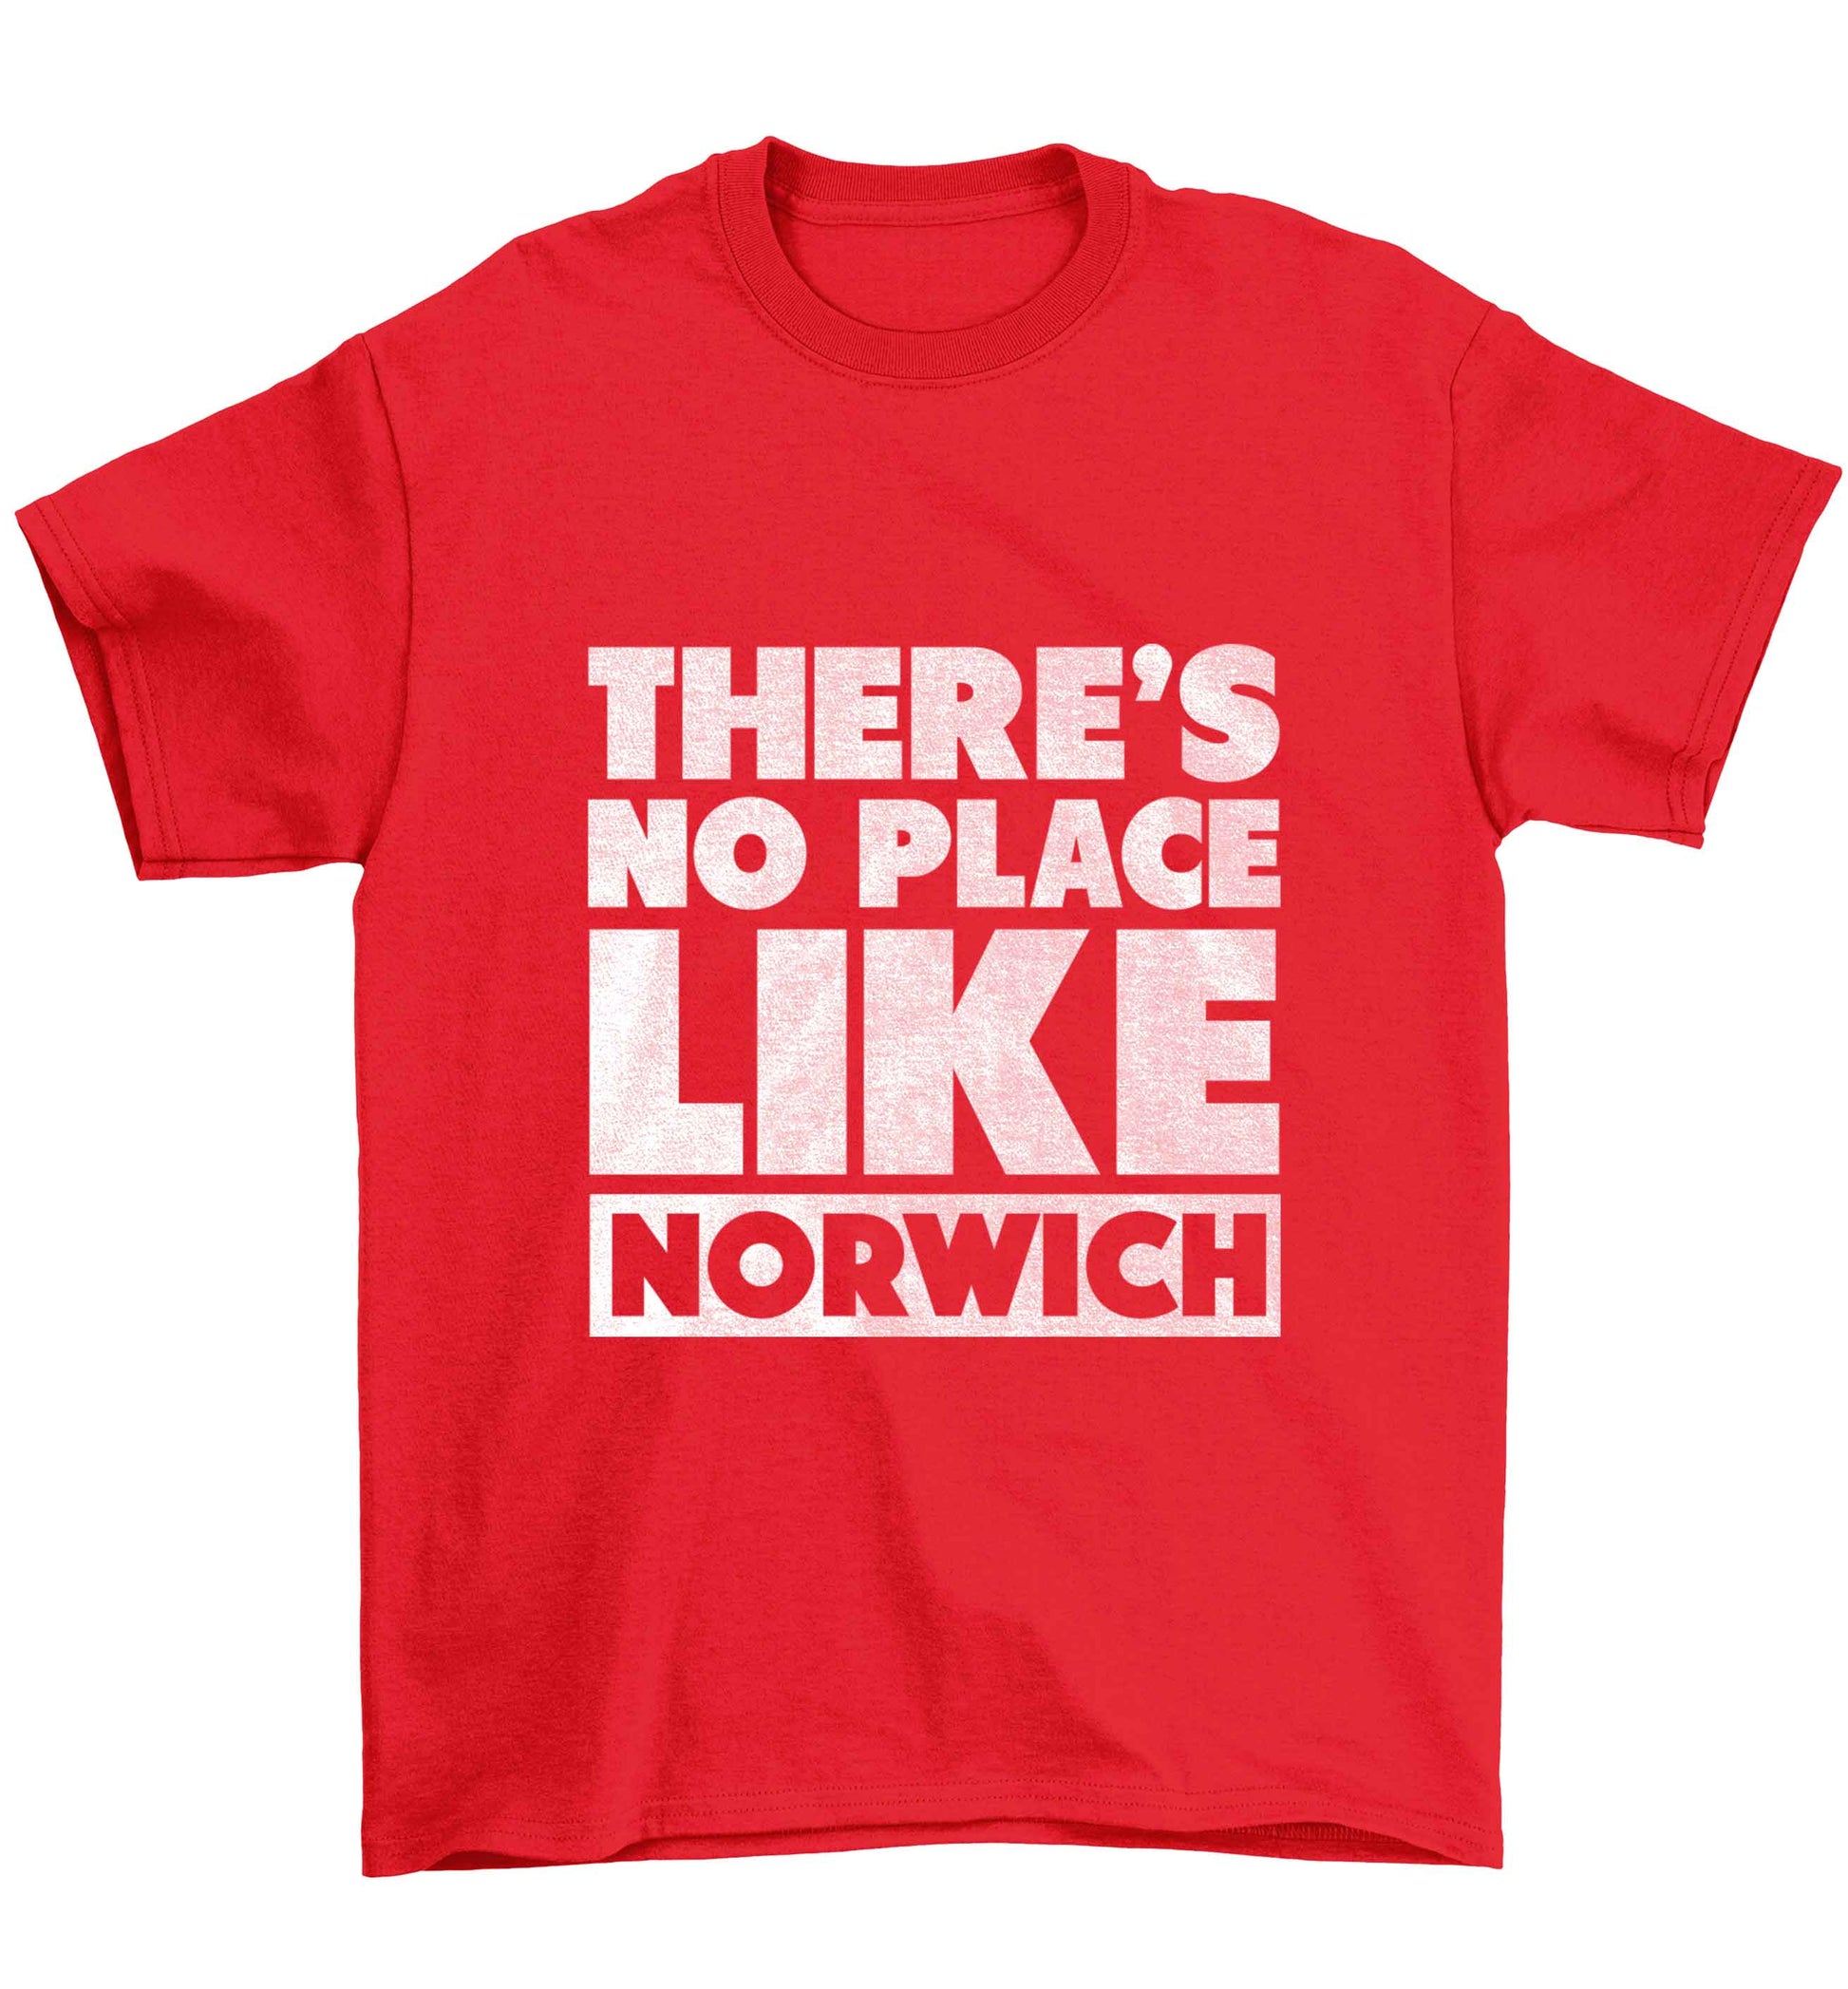 There's no place like Norwich Children's red Tshirt 12-13 Years